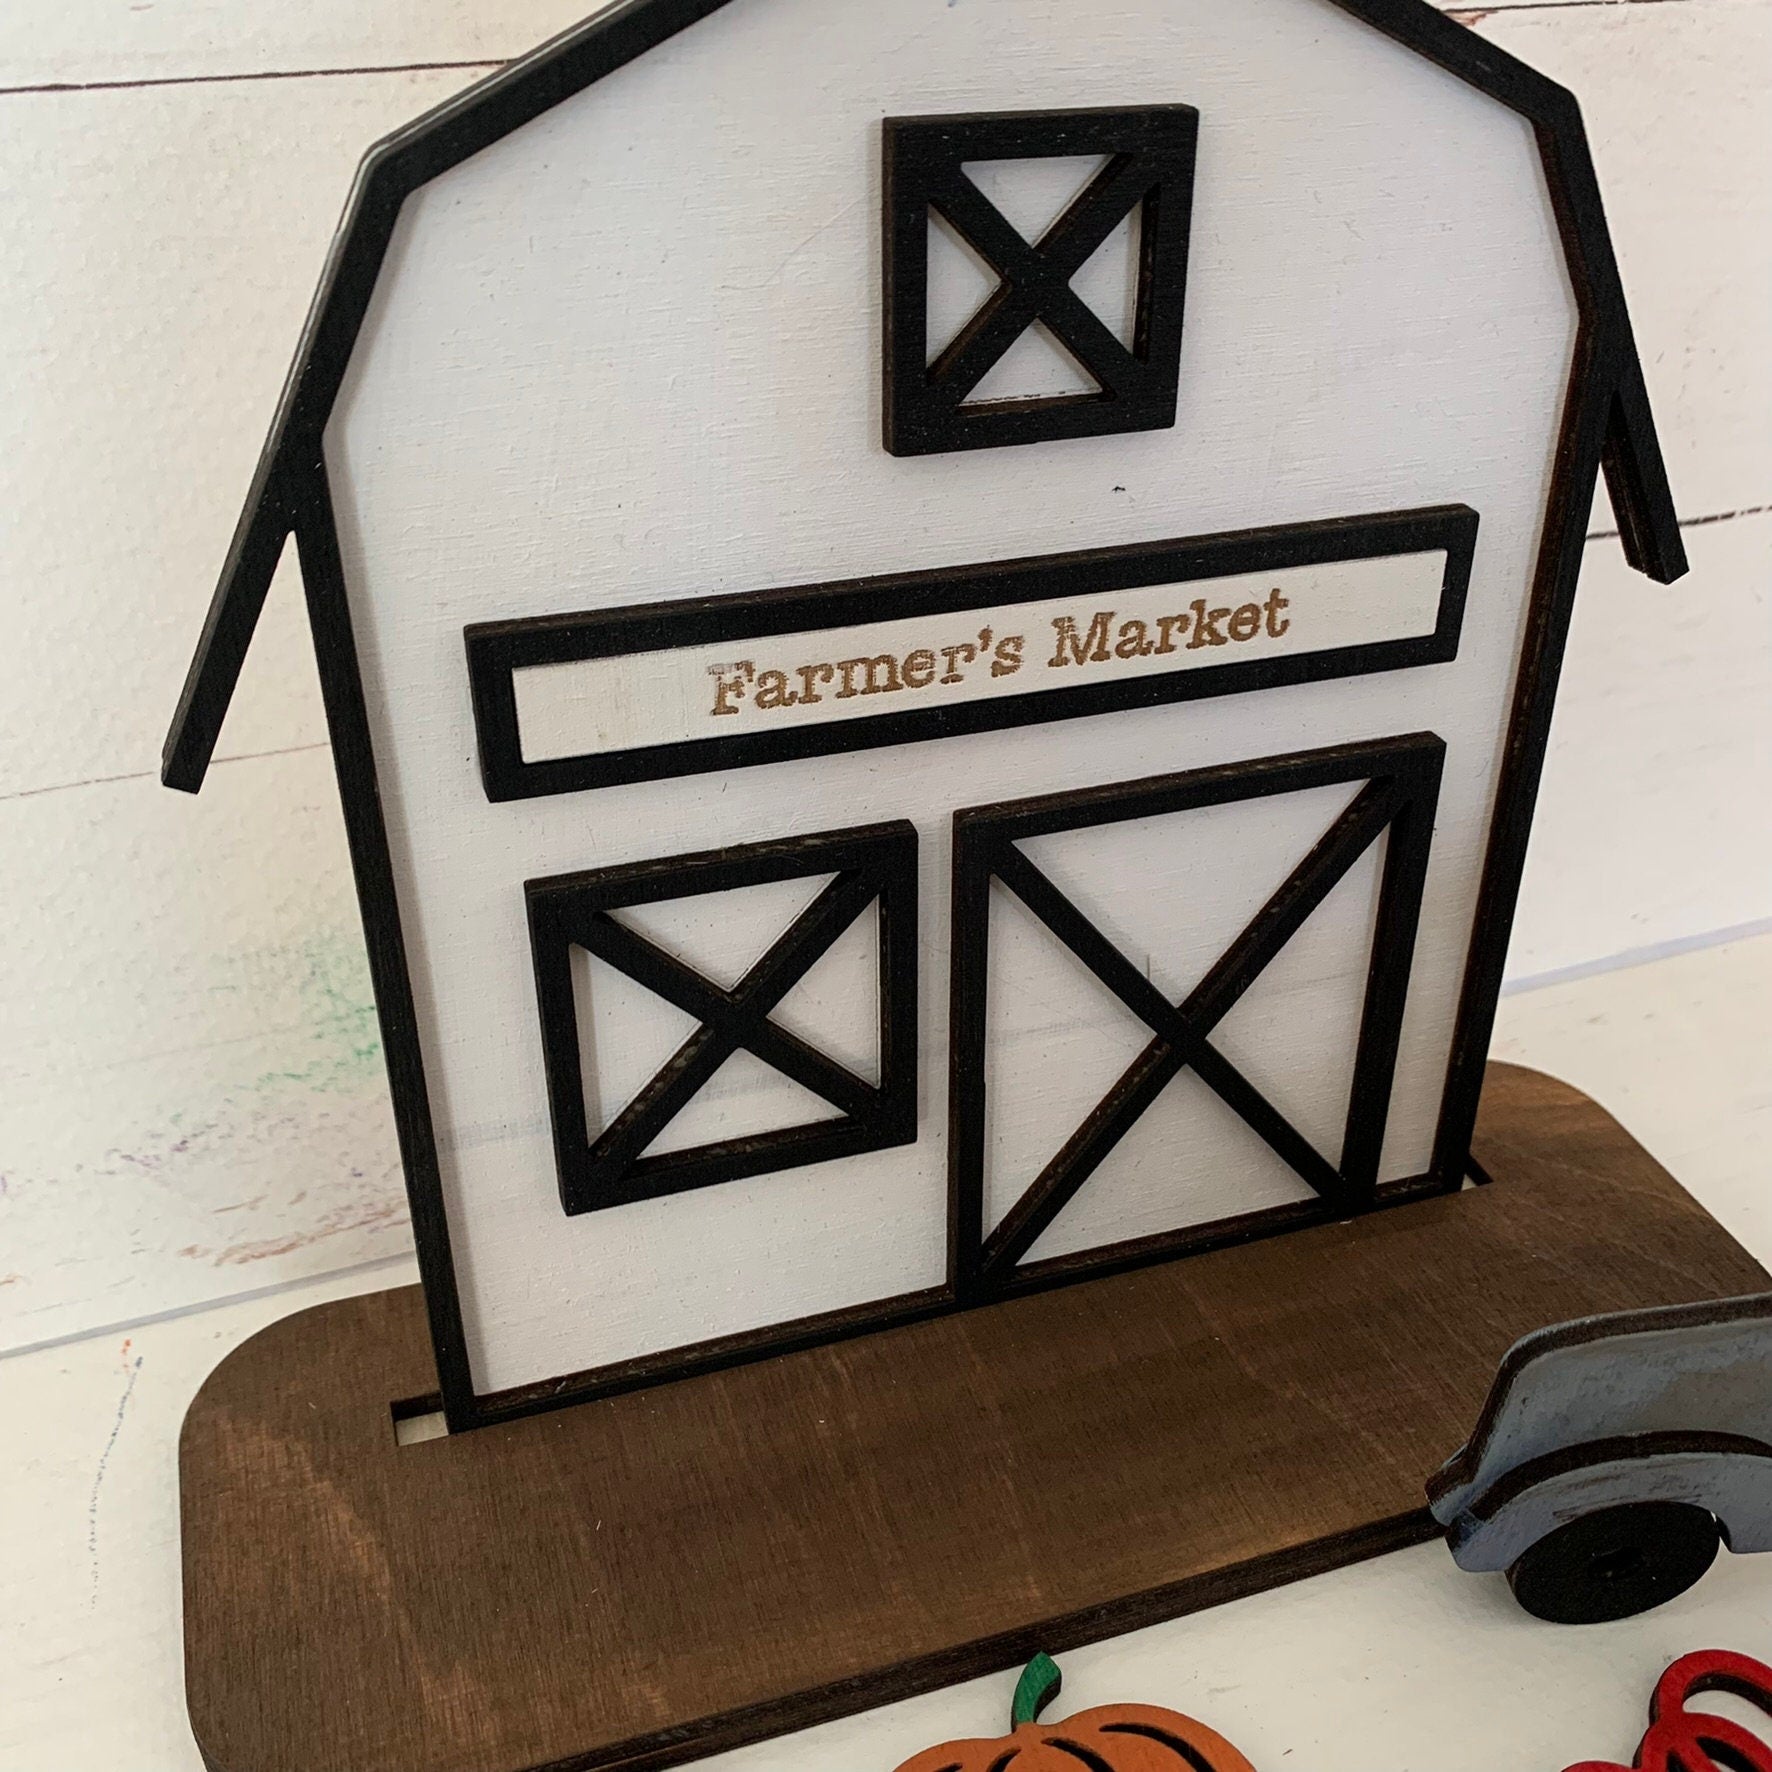 Laser Cut File - Interchangeable Barn with Vintage Truck - Digital Download SVG, DXF, AI files